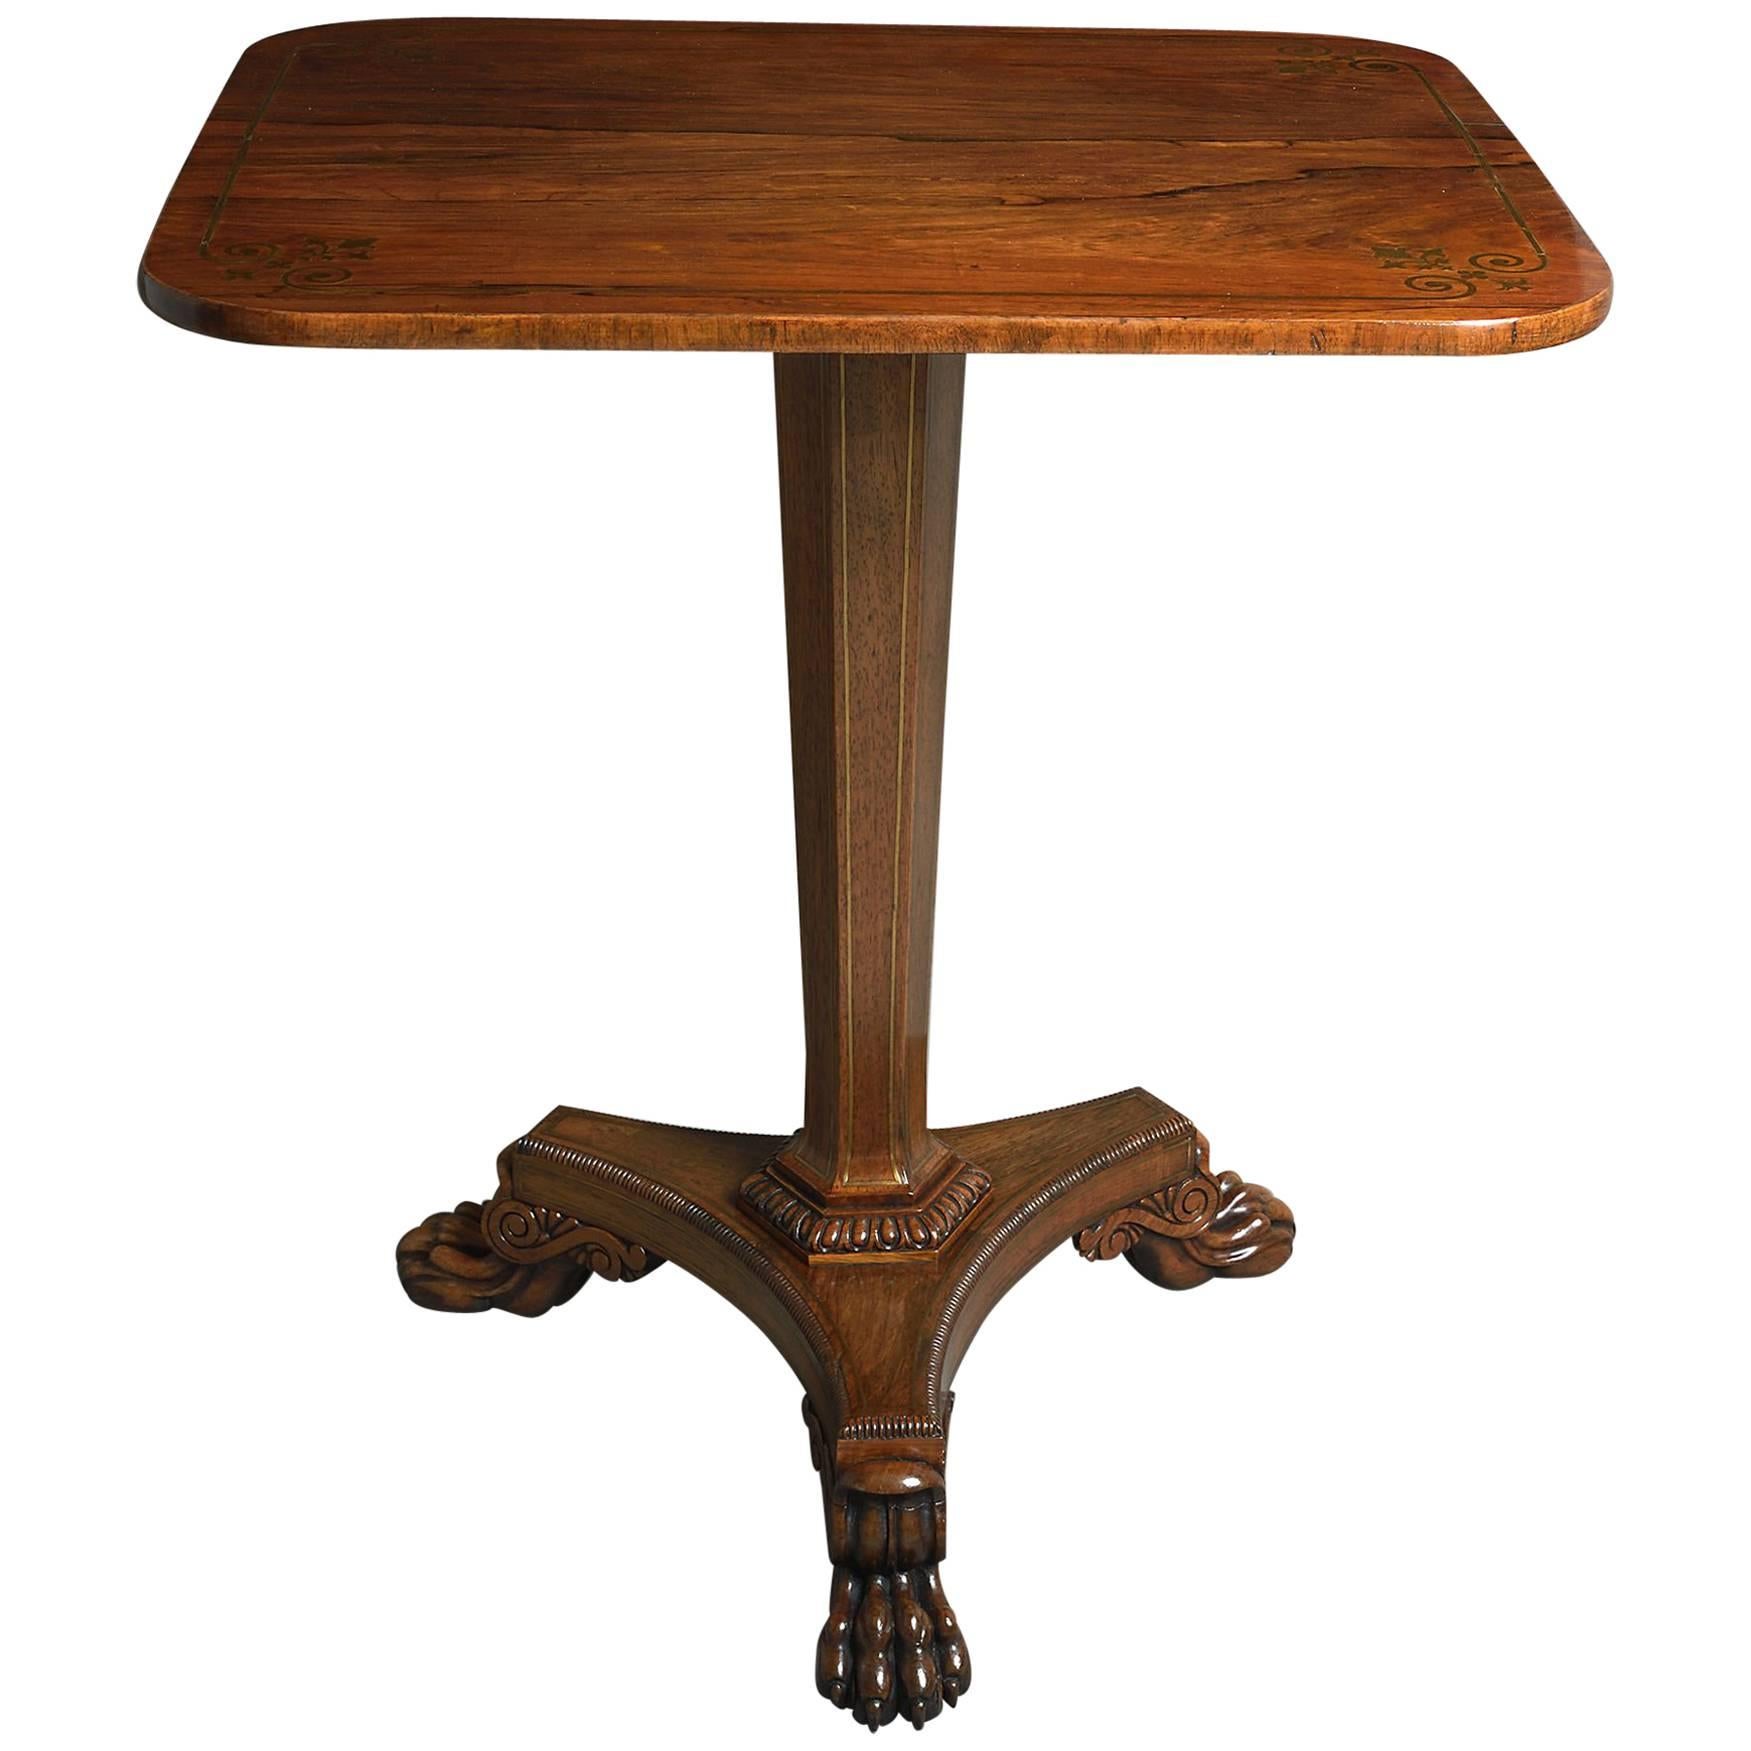 Early 19th Century Regency Period Rosewood Centre Table